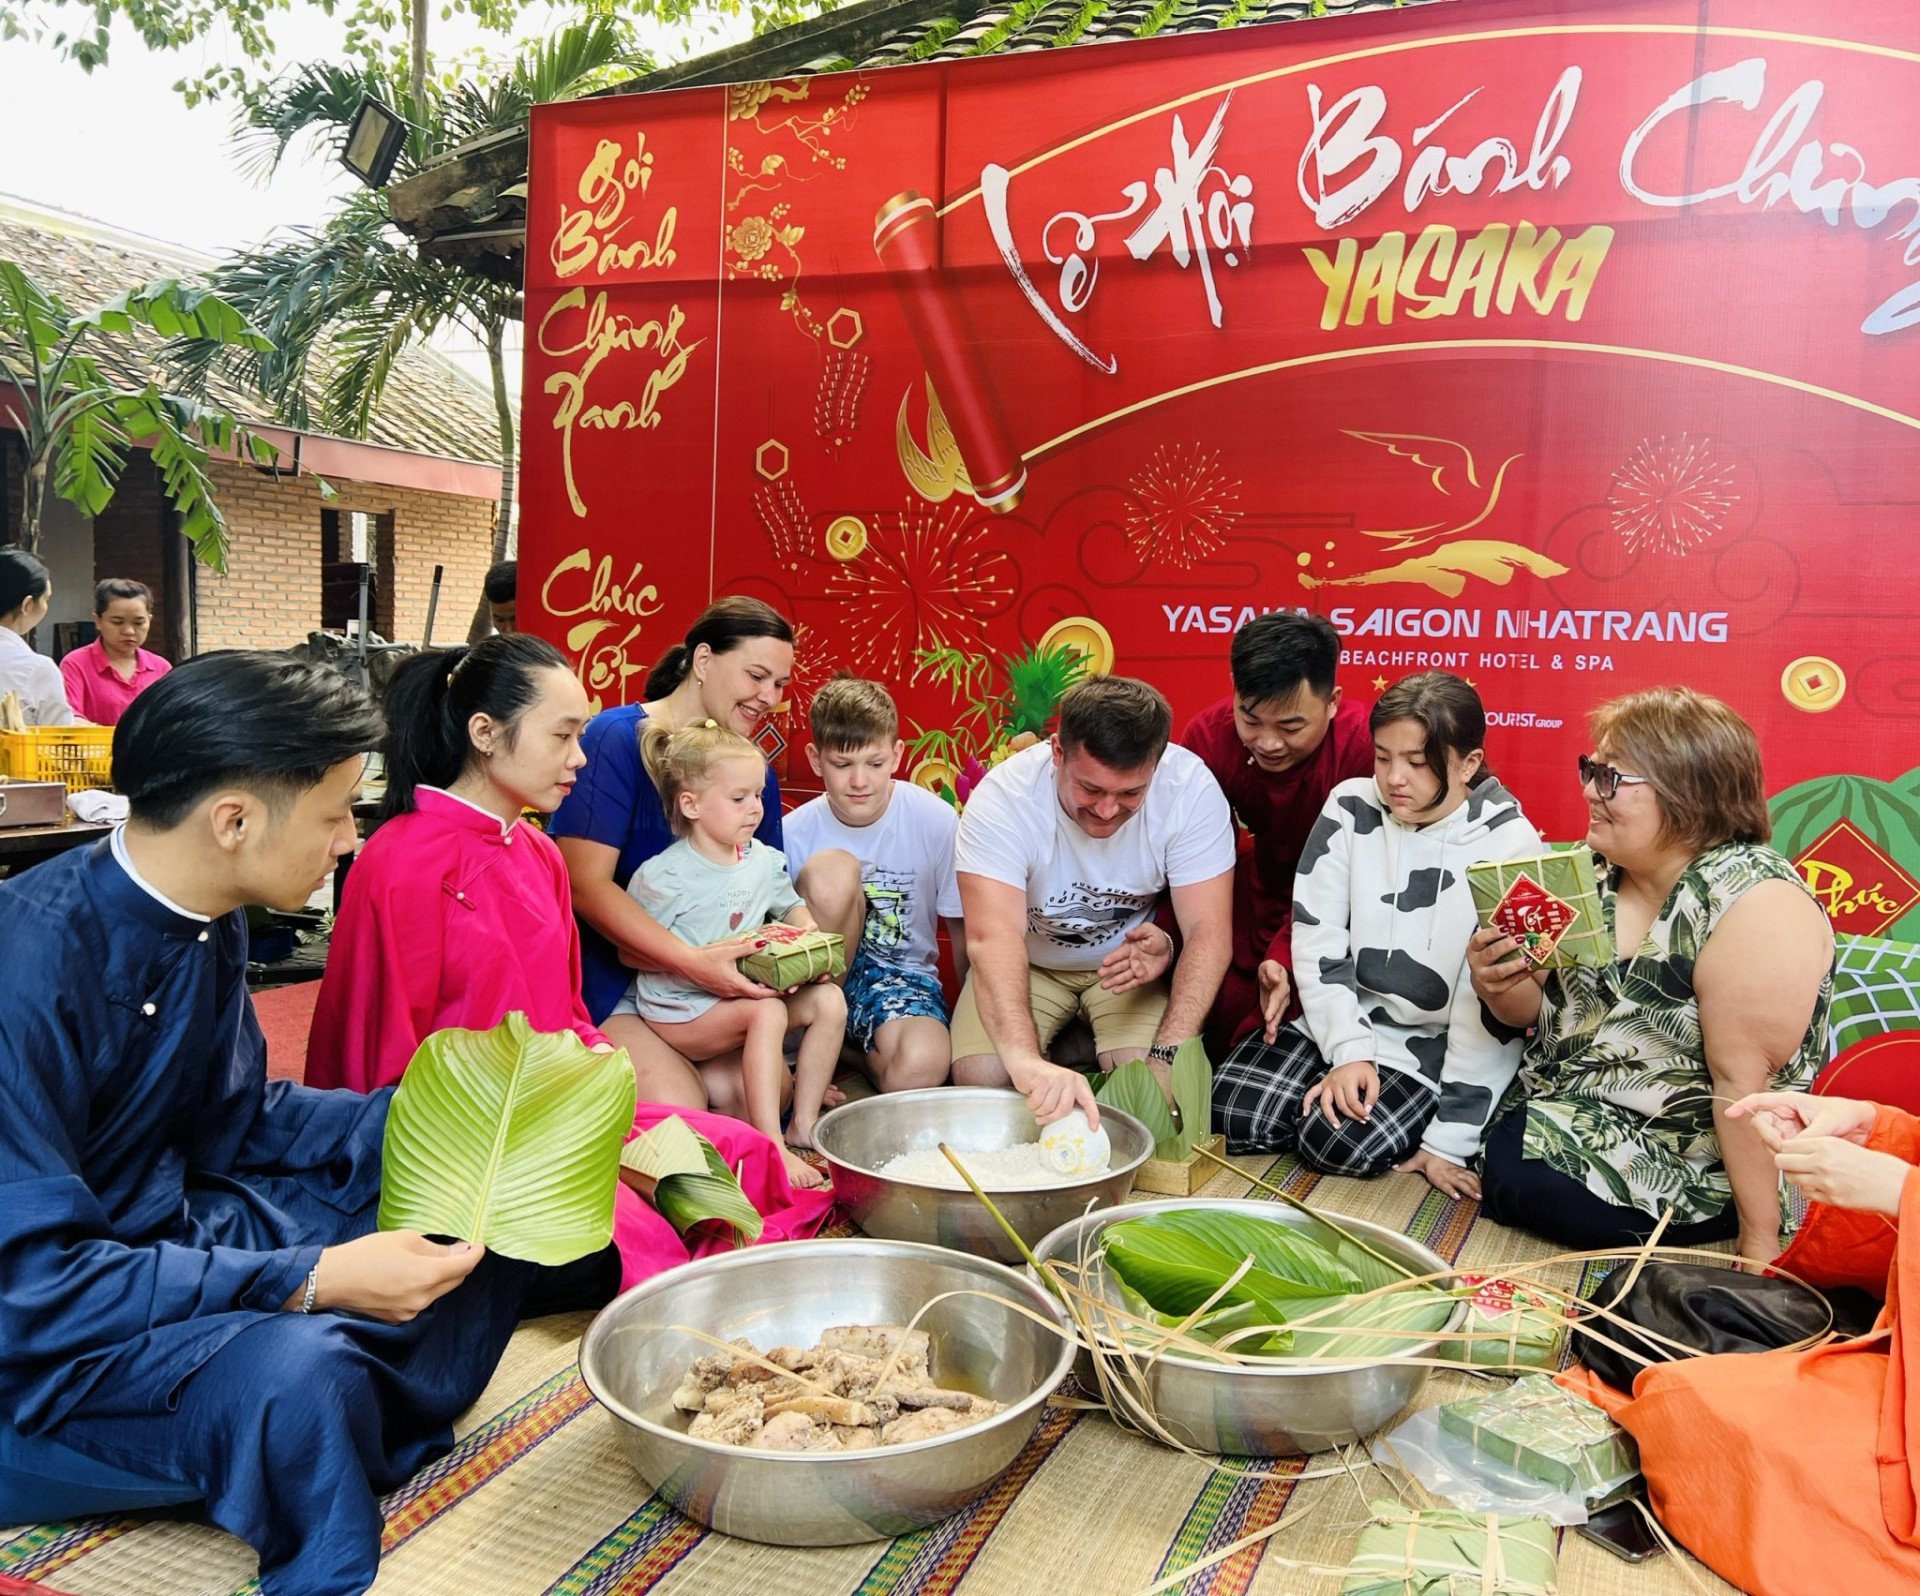 A family of Russian tourists trying wrapping “banh chung”…